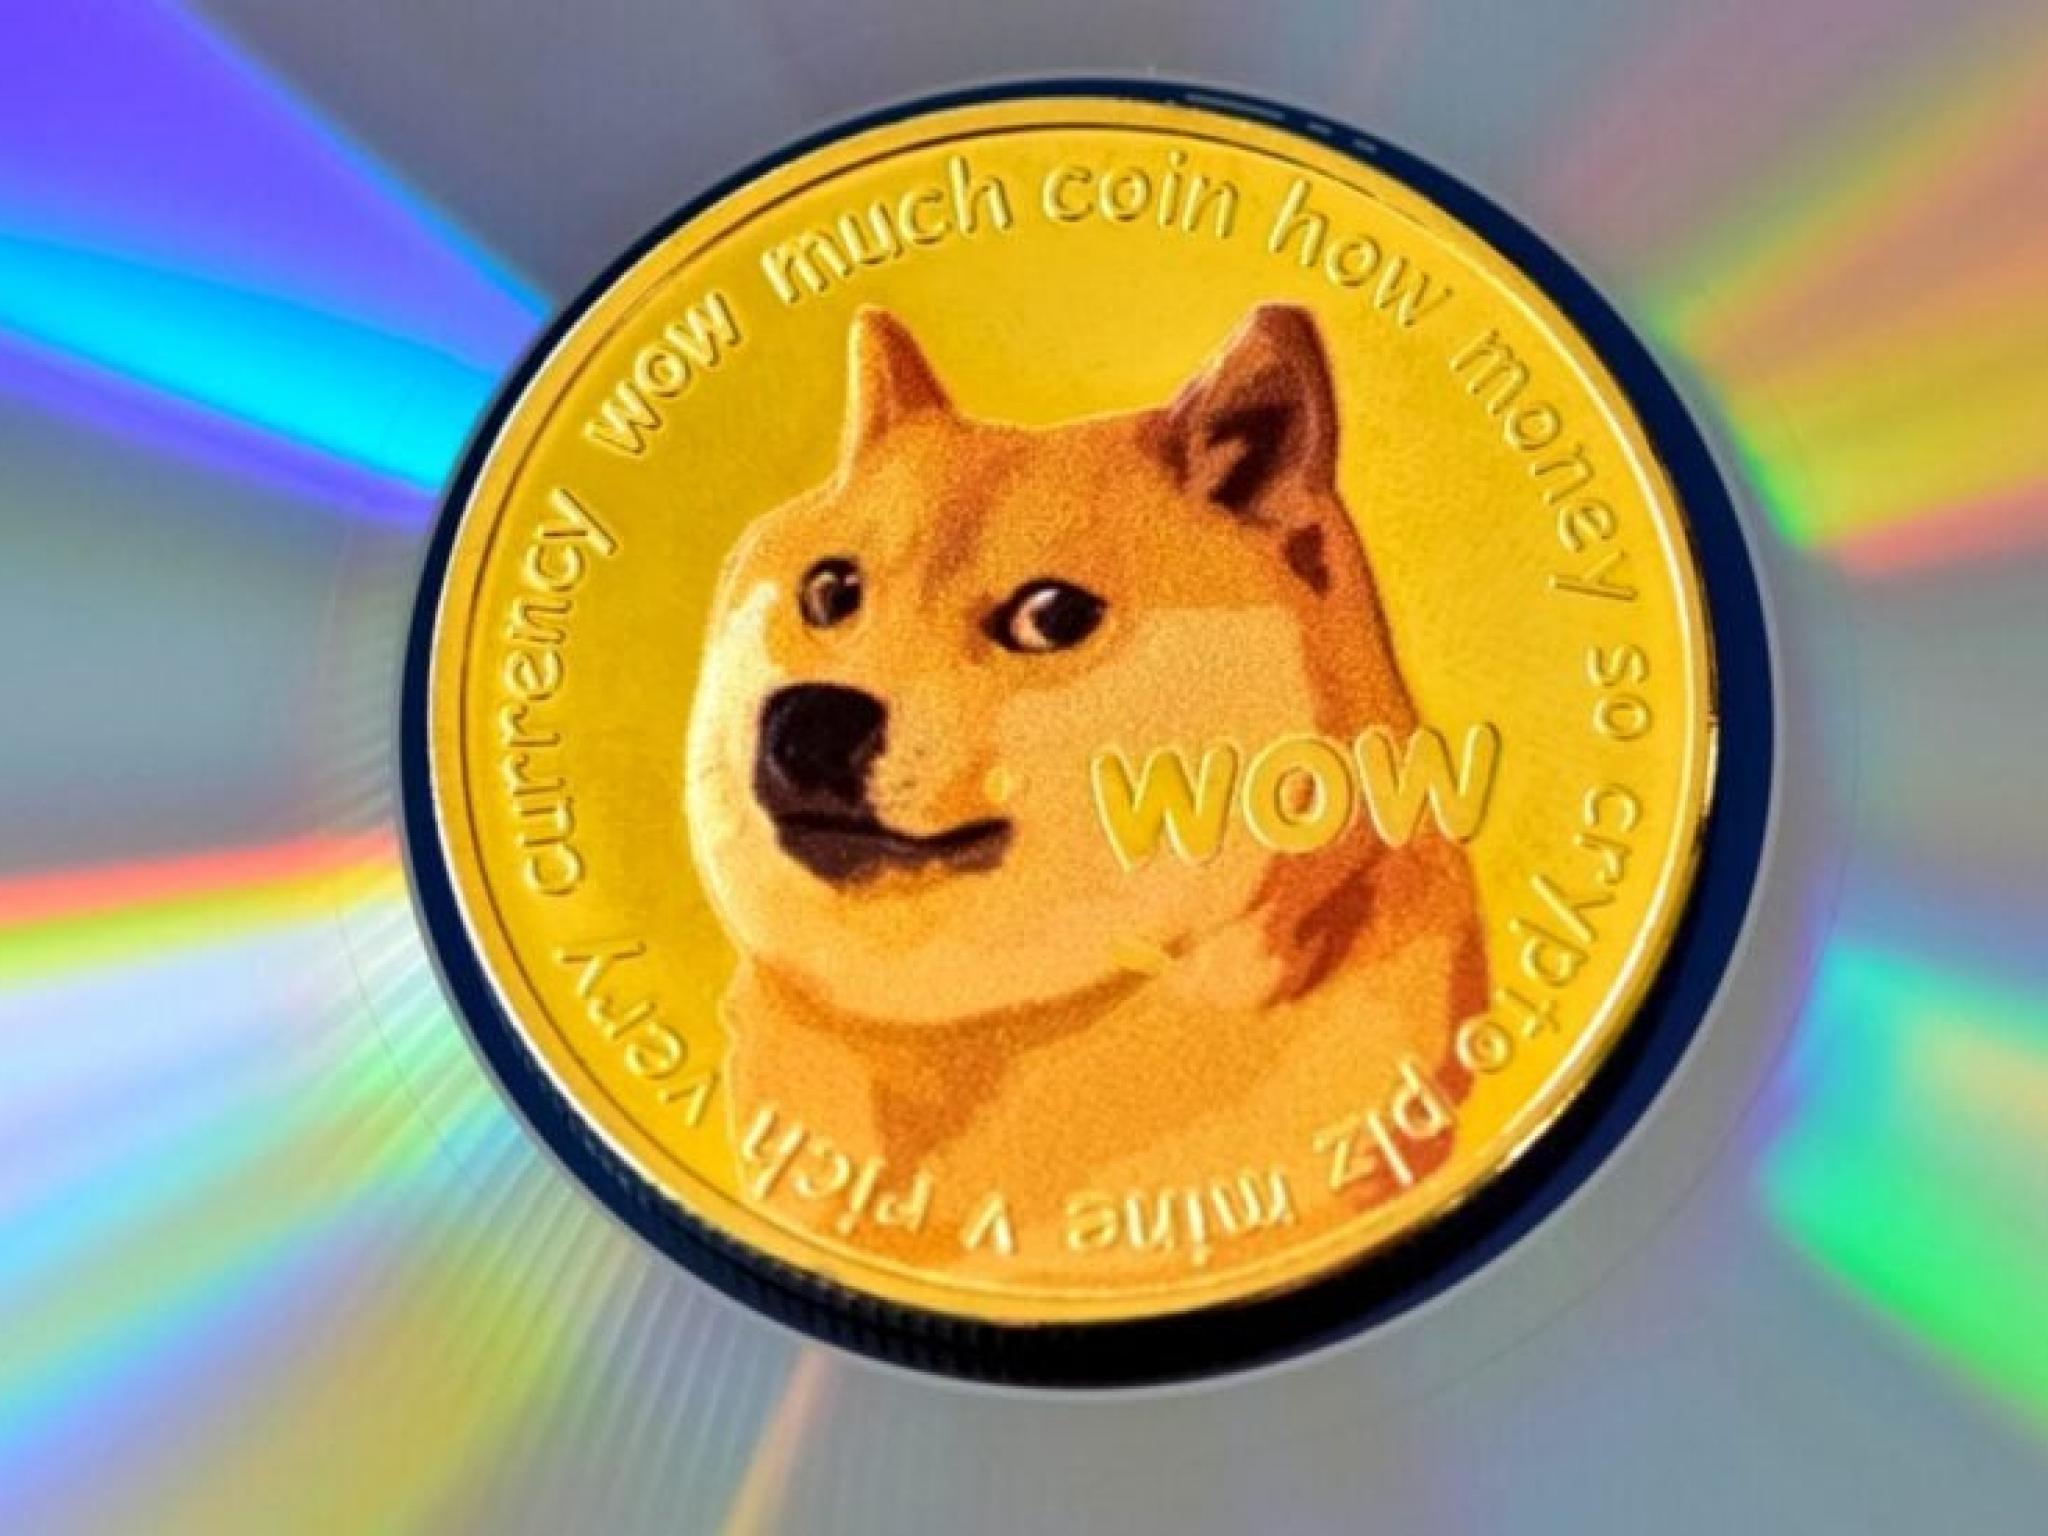  dogecoin-could-make-elon-musks-fate-loves-irony-comment-come-true-if-it-flips-ethereums-market-cap-at-last-bull-run-says-this-crypto-influencer 